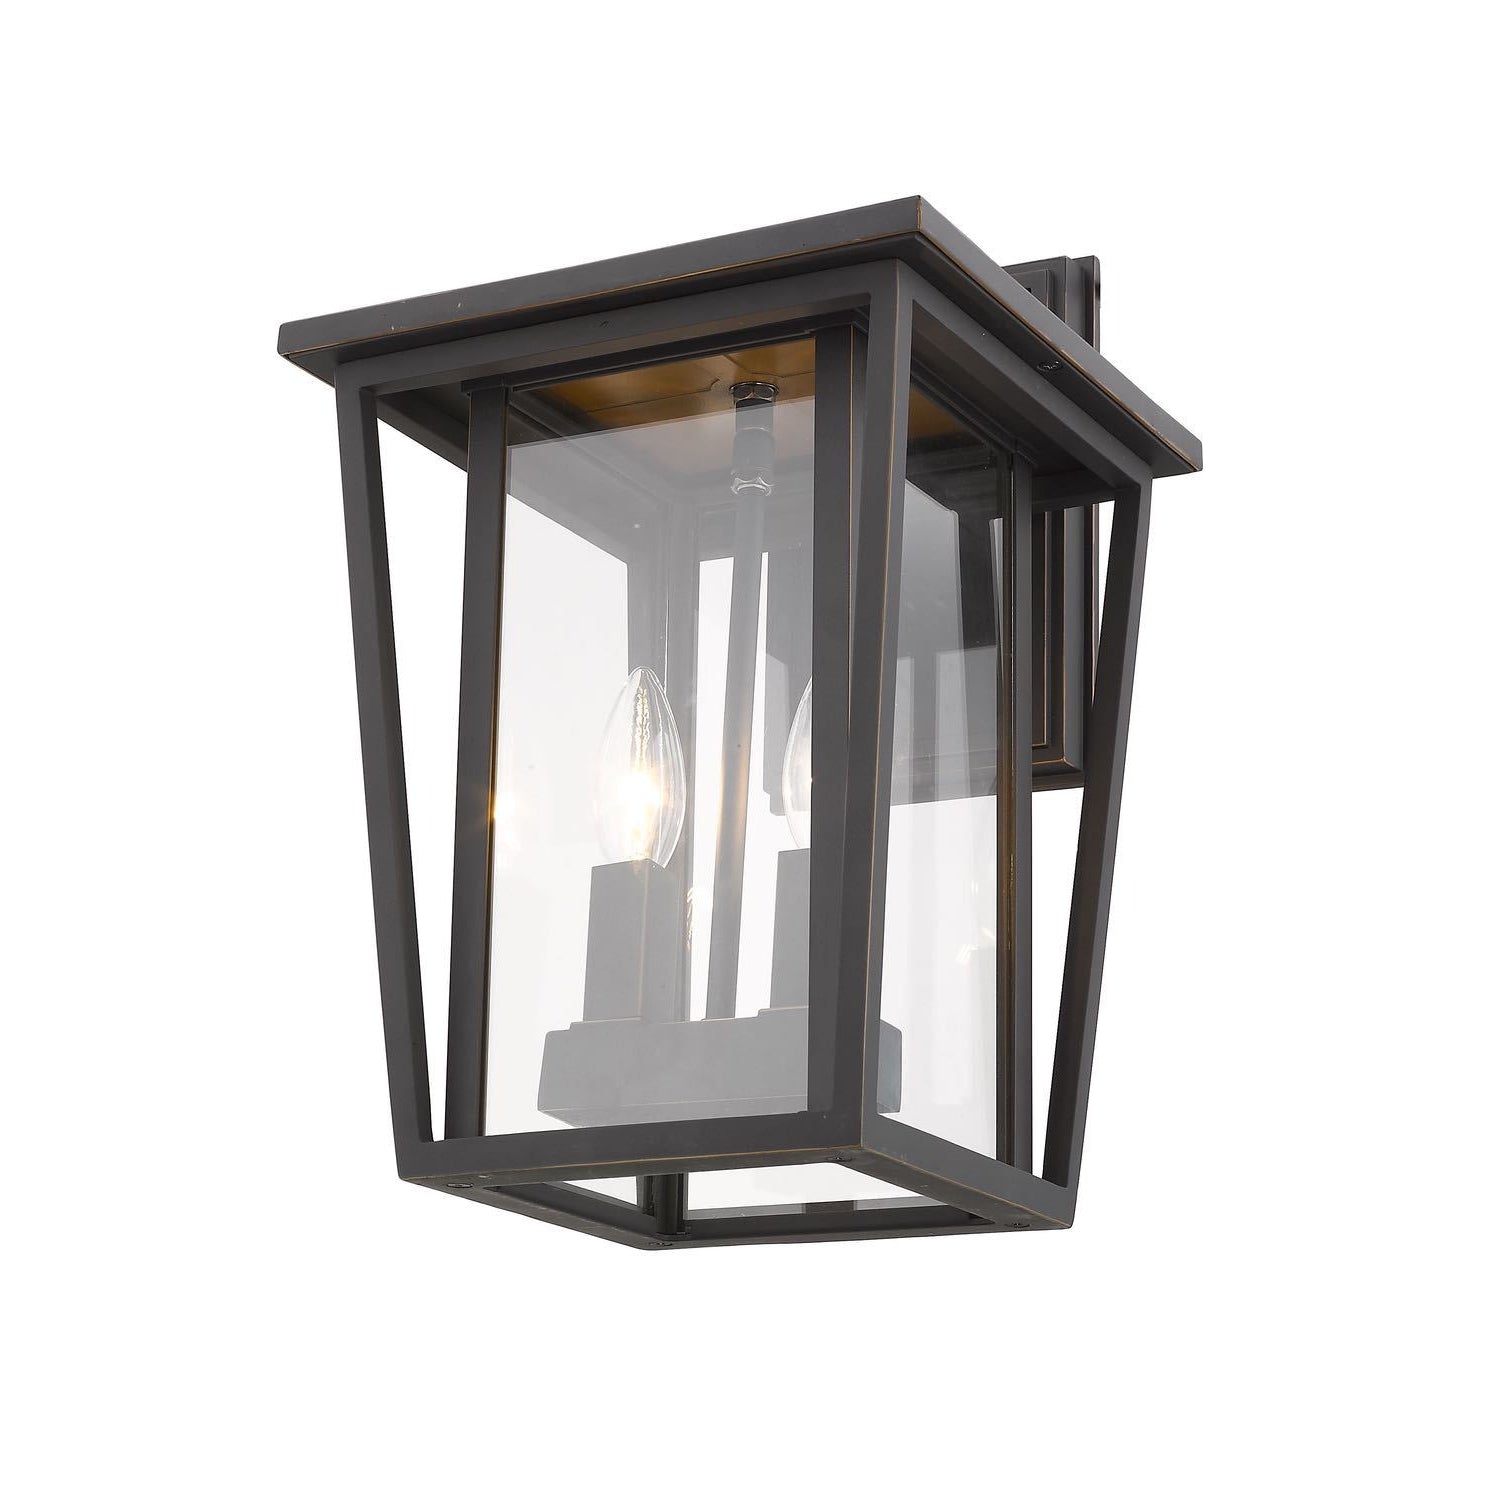 Seoul Outdoor Wall Light Oil Rubbed Bronze